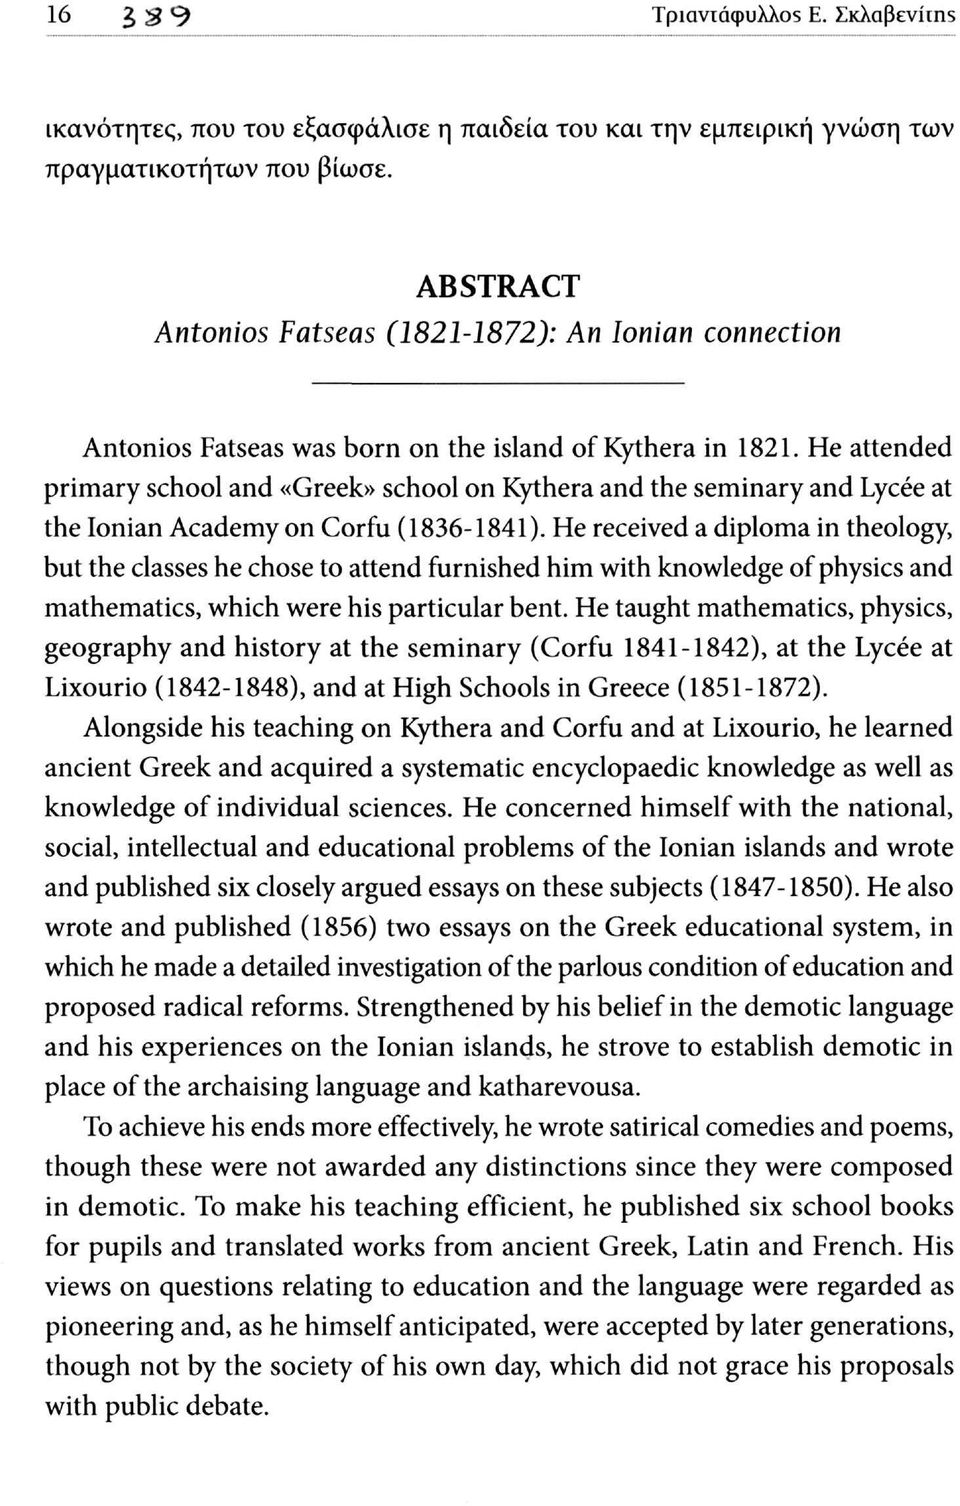 He attended primary school and «Greek» school on Kythera and the seminary and Lycée at the Ionian Academy on Corfu (1836-1841).